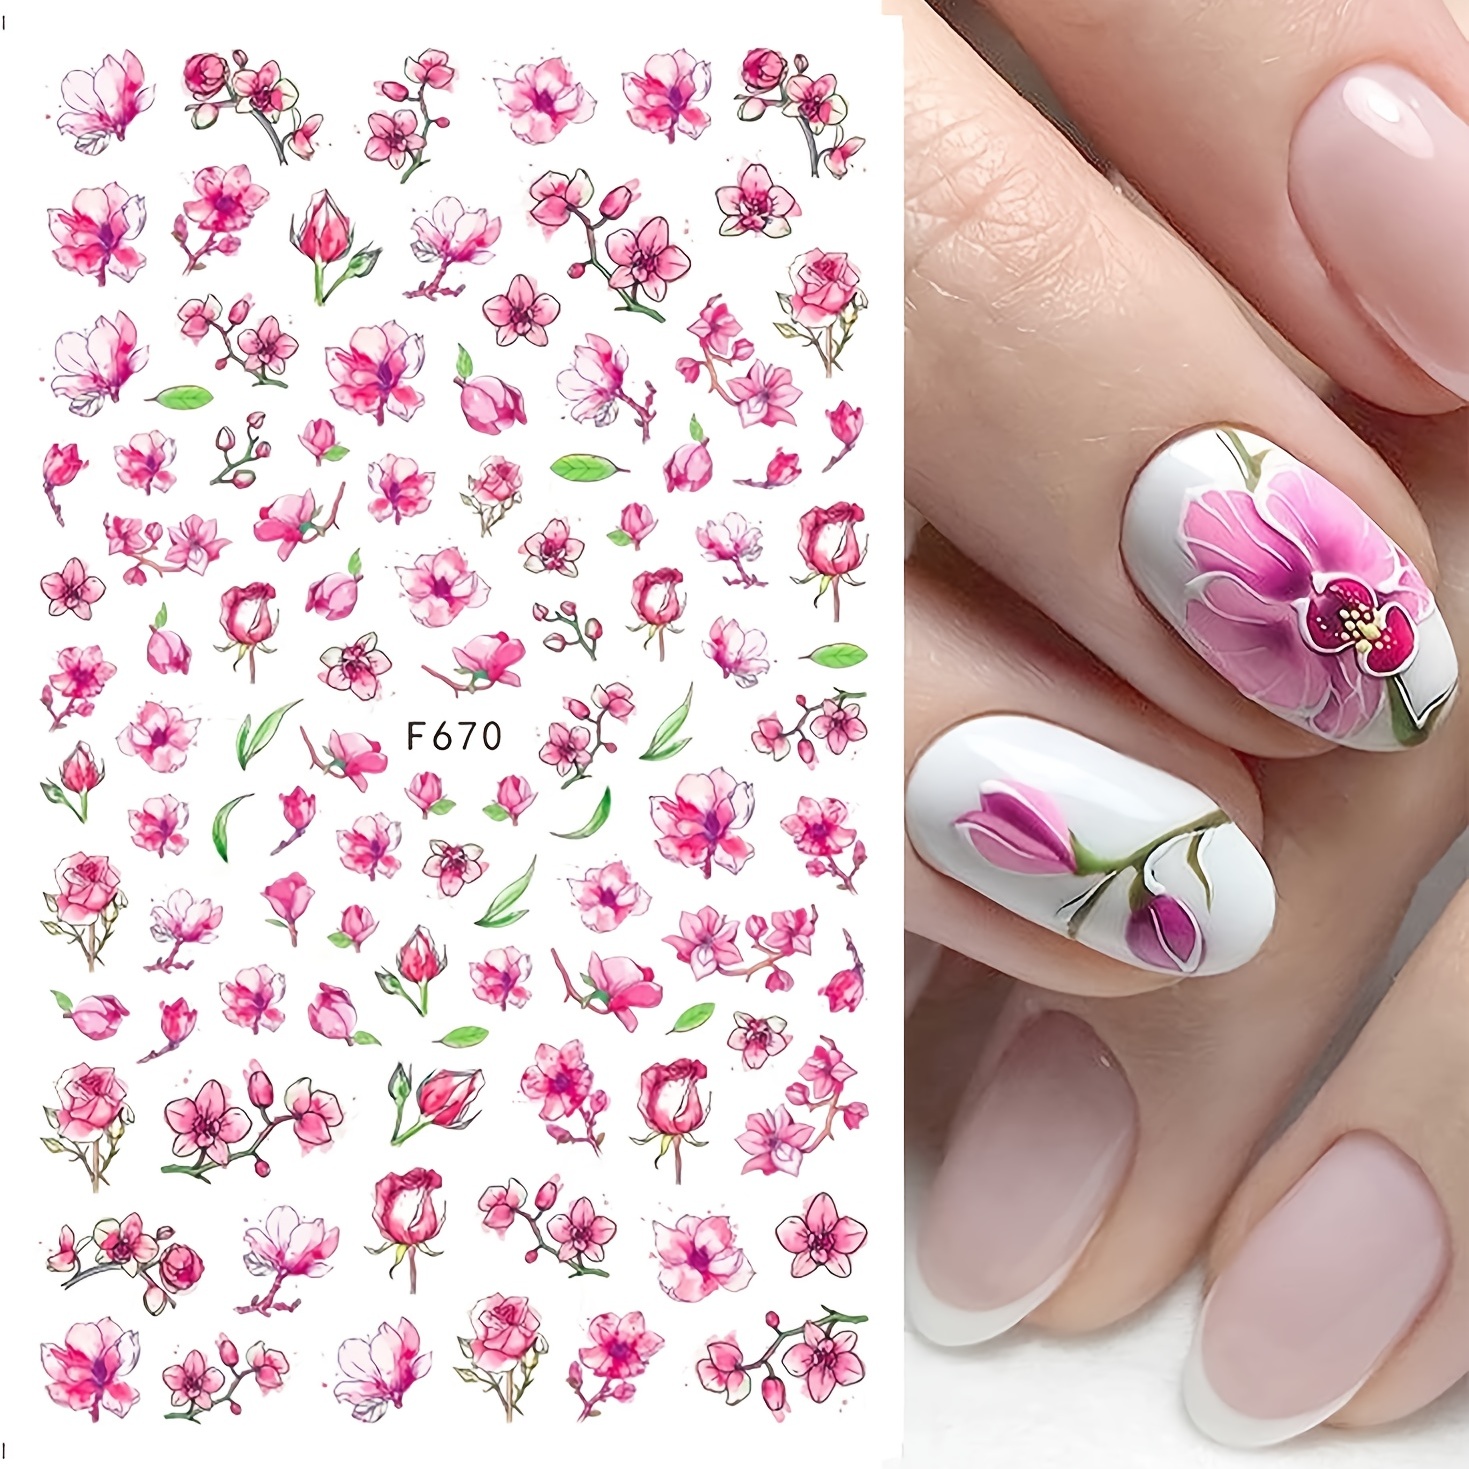 Flower Nail Art Stickers Decals 4 Sheets White Cherry Blossoms Nail Art  Supplies 3D Self-Adhesive Nail Decorations Accessories DIY Acrylic Nail Art